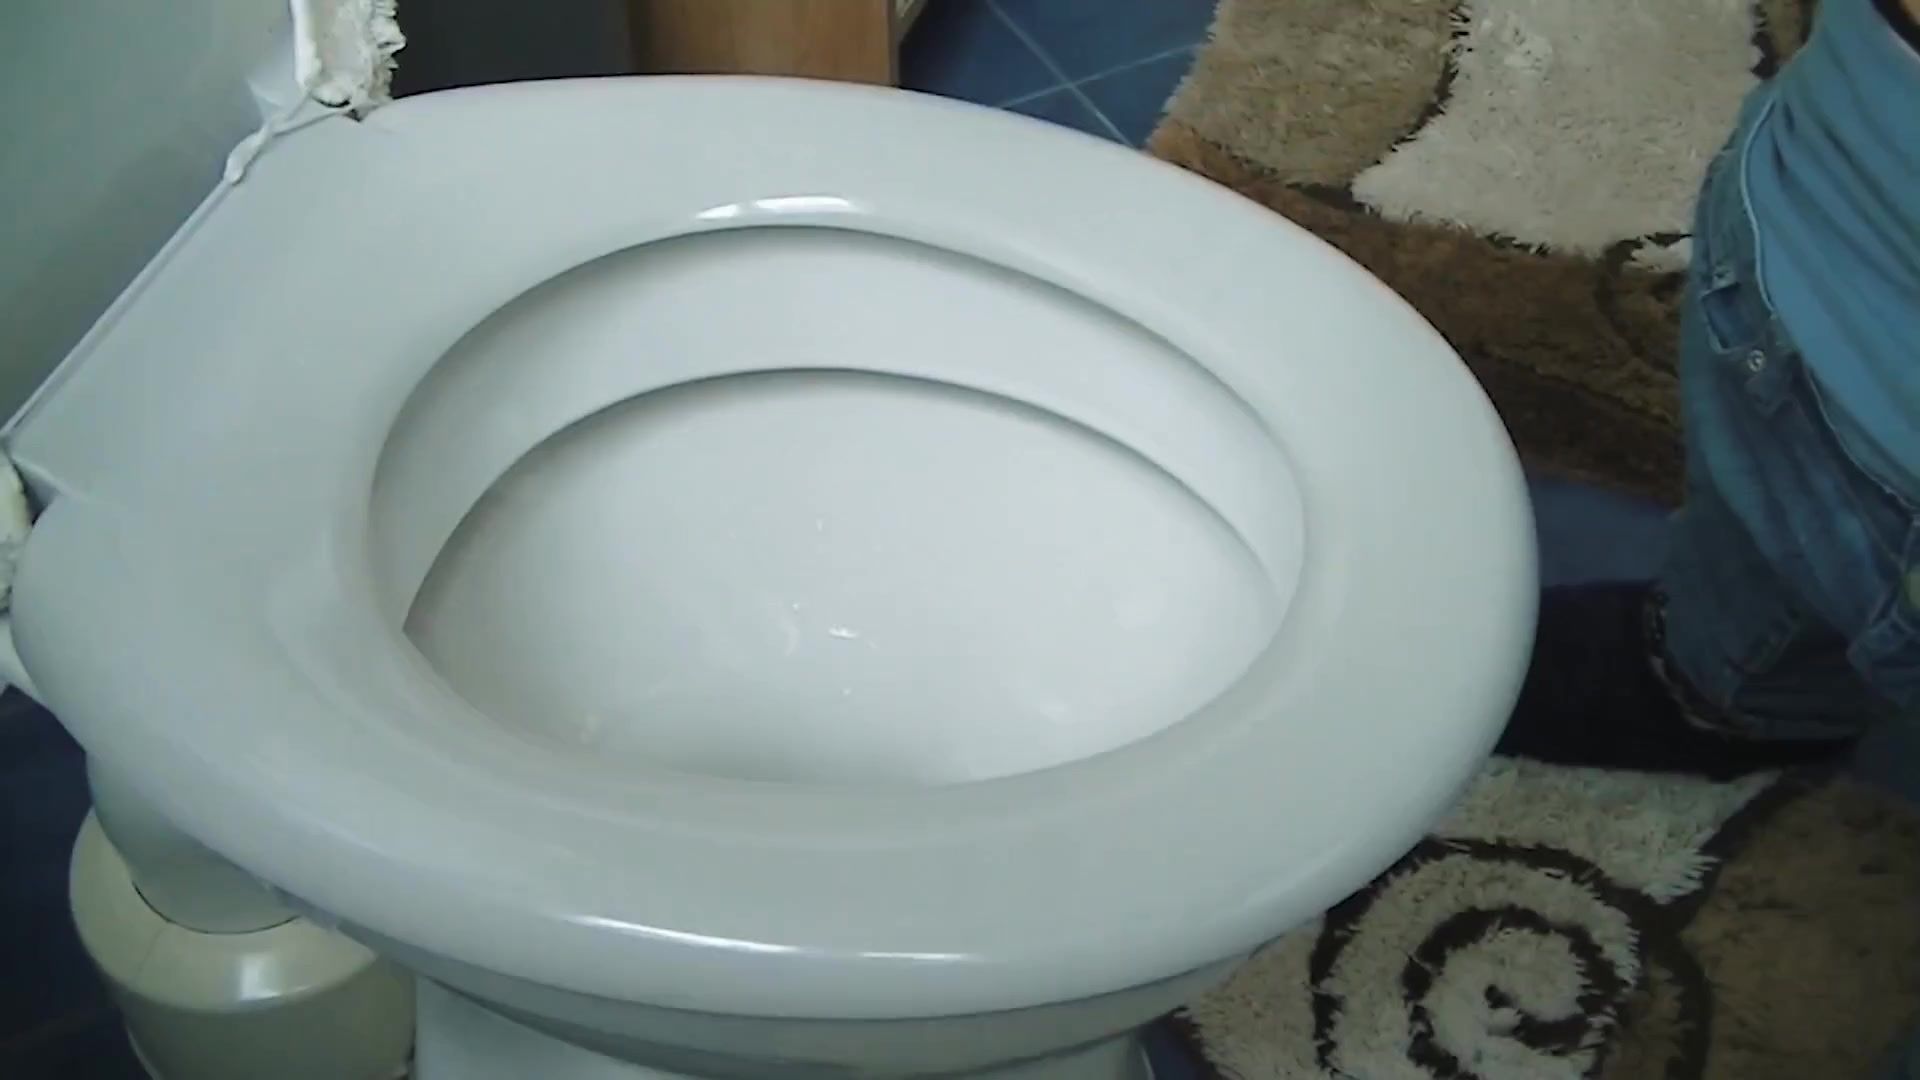 Girl films herself shitting on the toilet